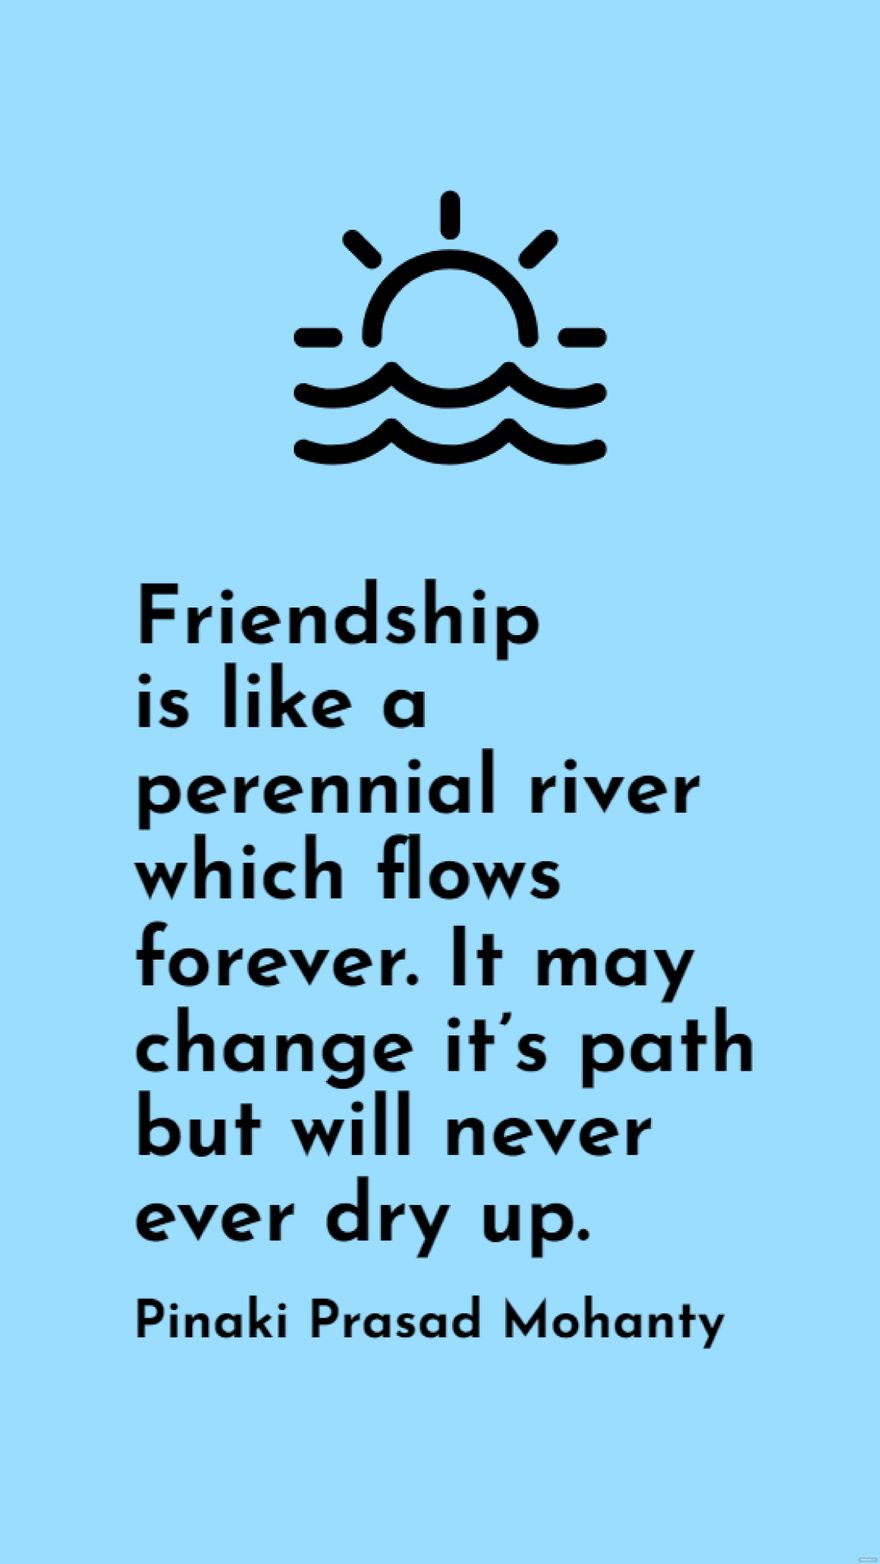 Pinaki Prasad Mohanty - Friendship is like a perennial river which flows forever. It may change it’s path but will never ever dry up.